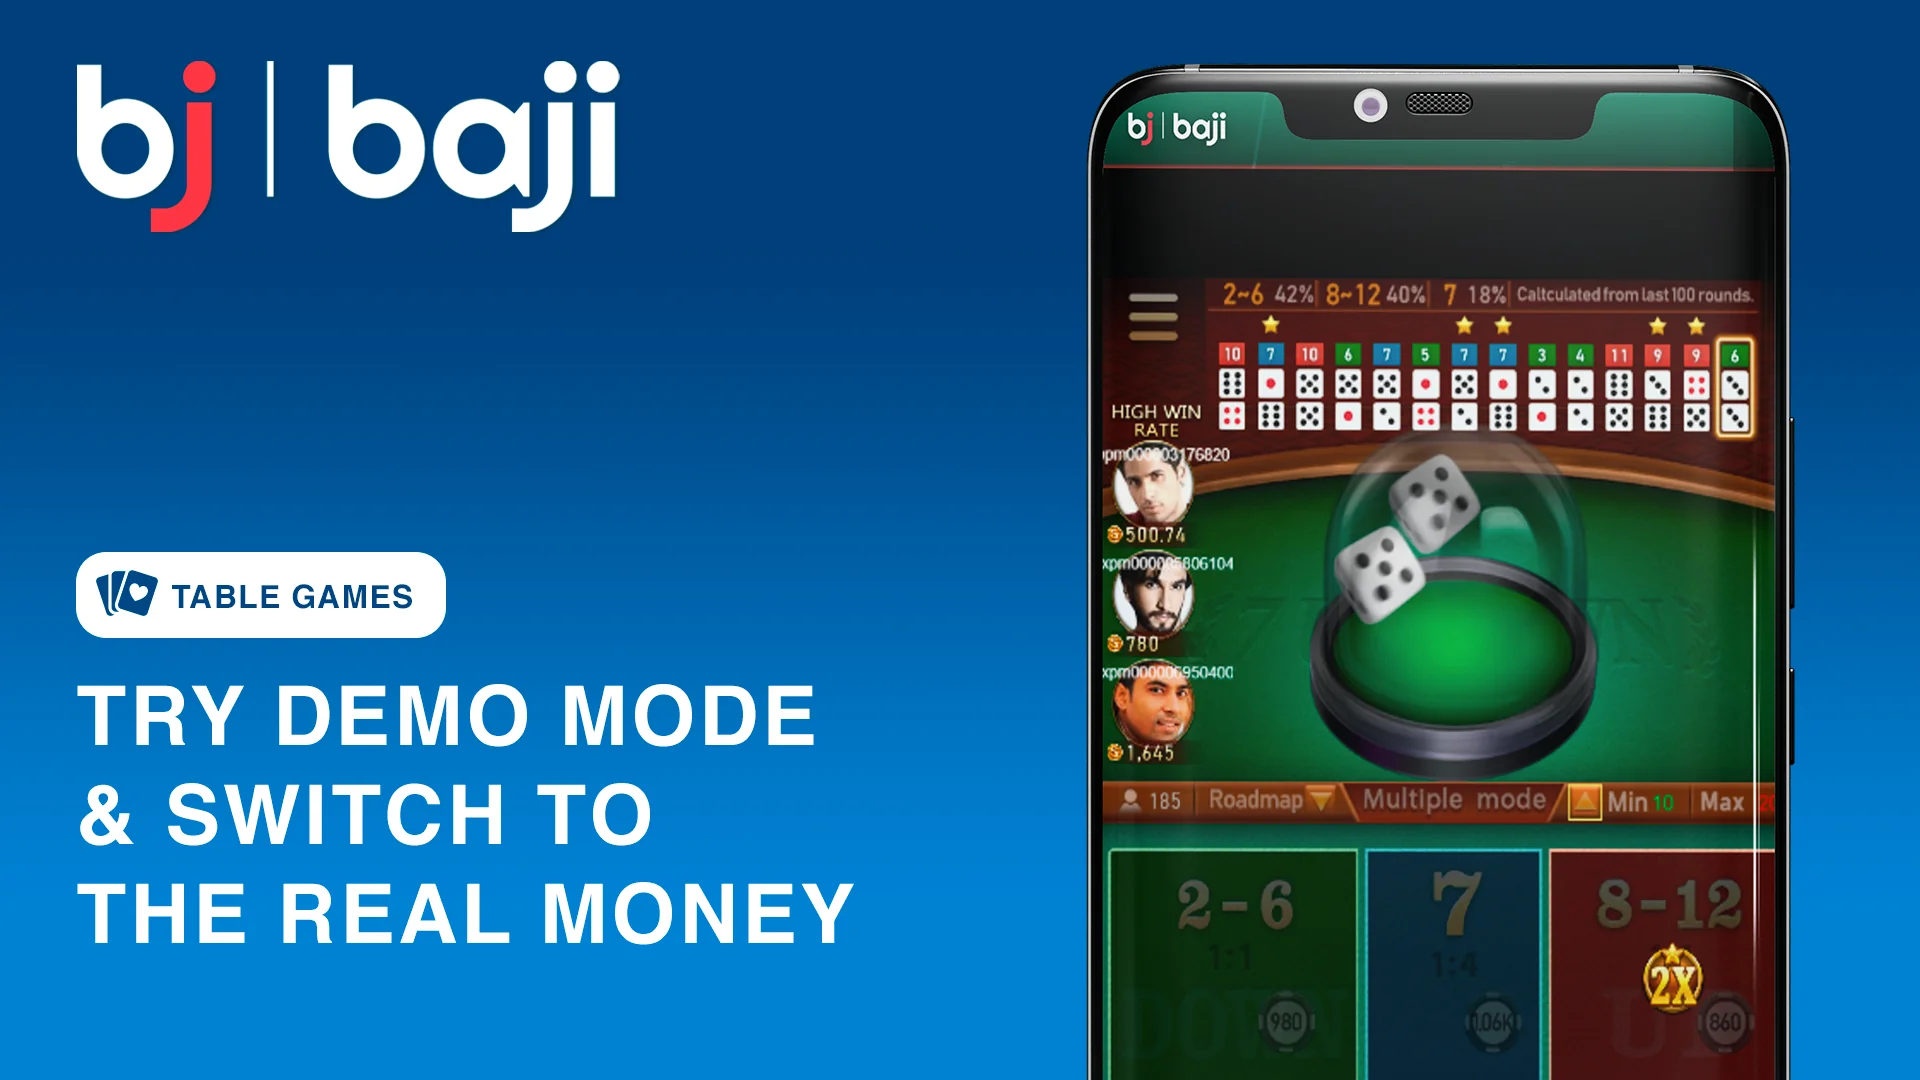 Try Demo Mode and Switch to the real money - Baji Bangladesh